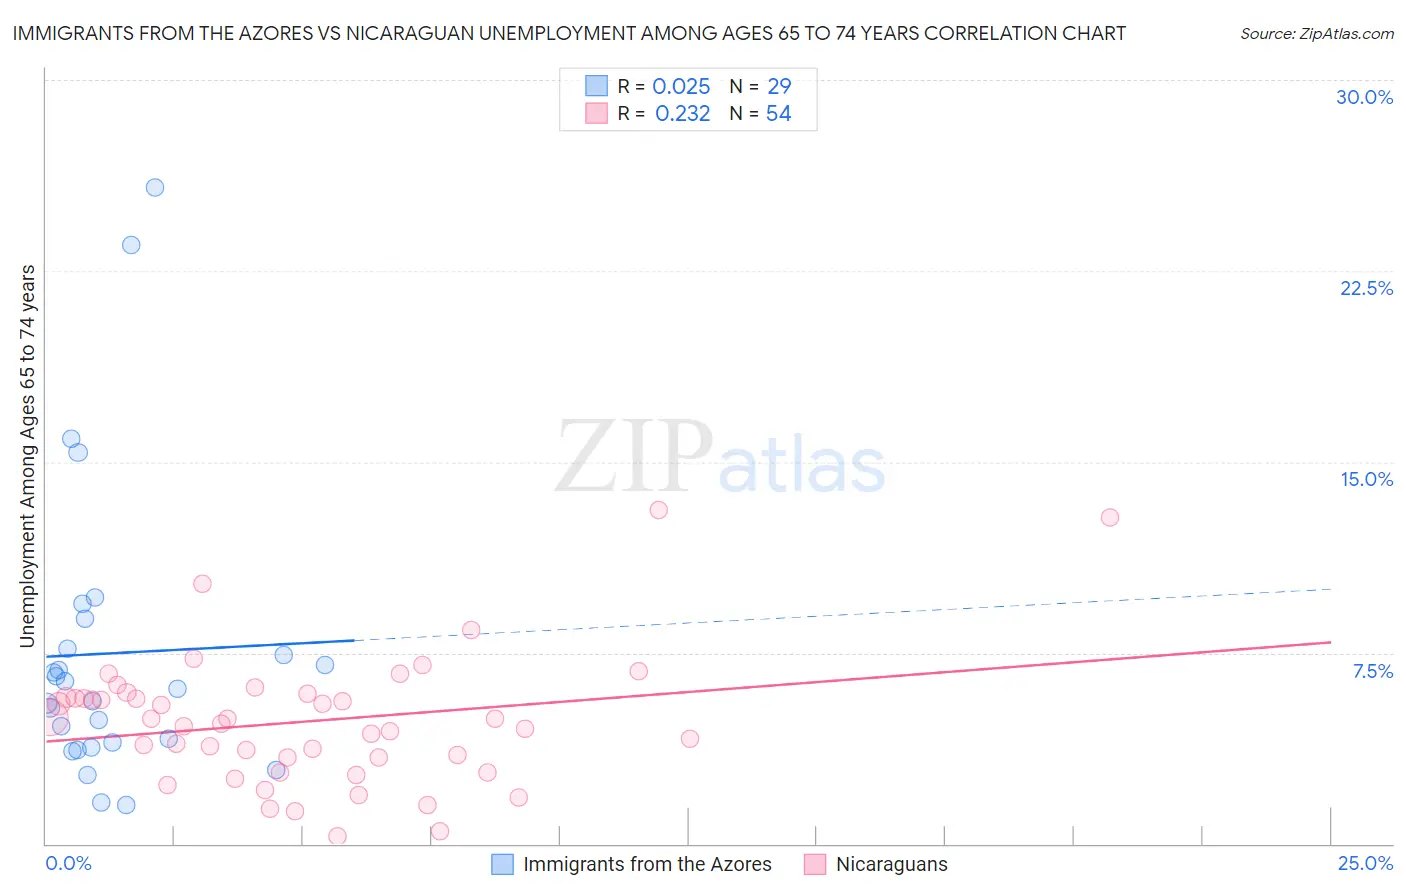 Immigrants from the Azores vs Nicaraguan Unemployment Among Ages 65 to 74 years